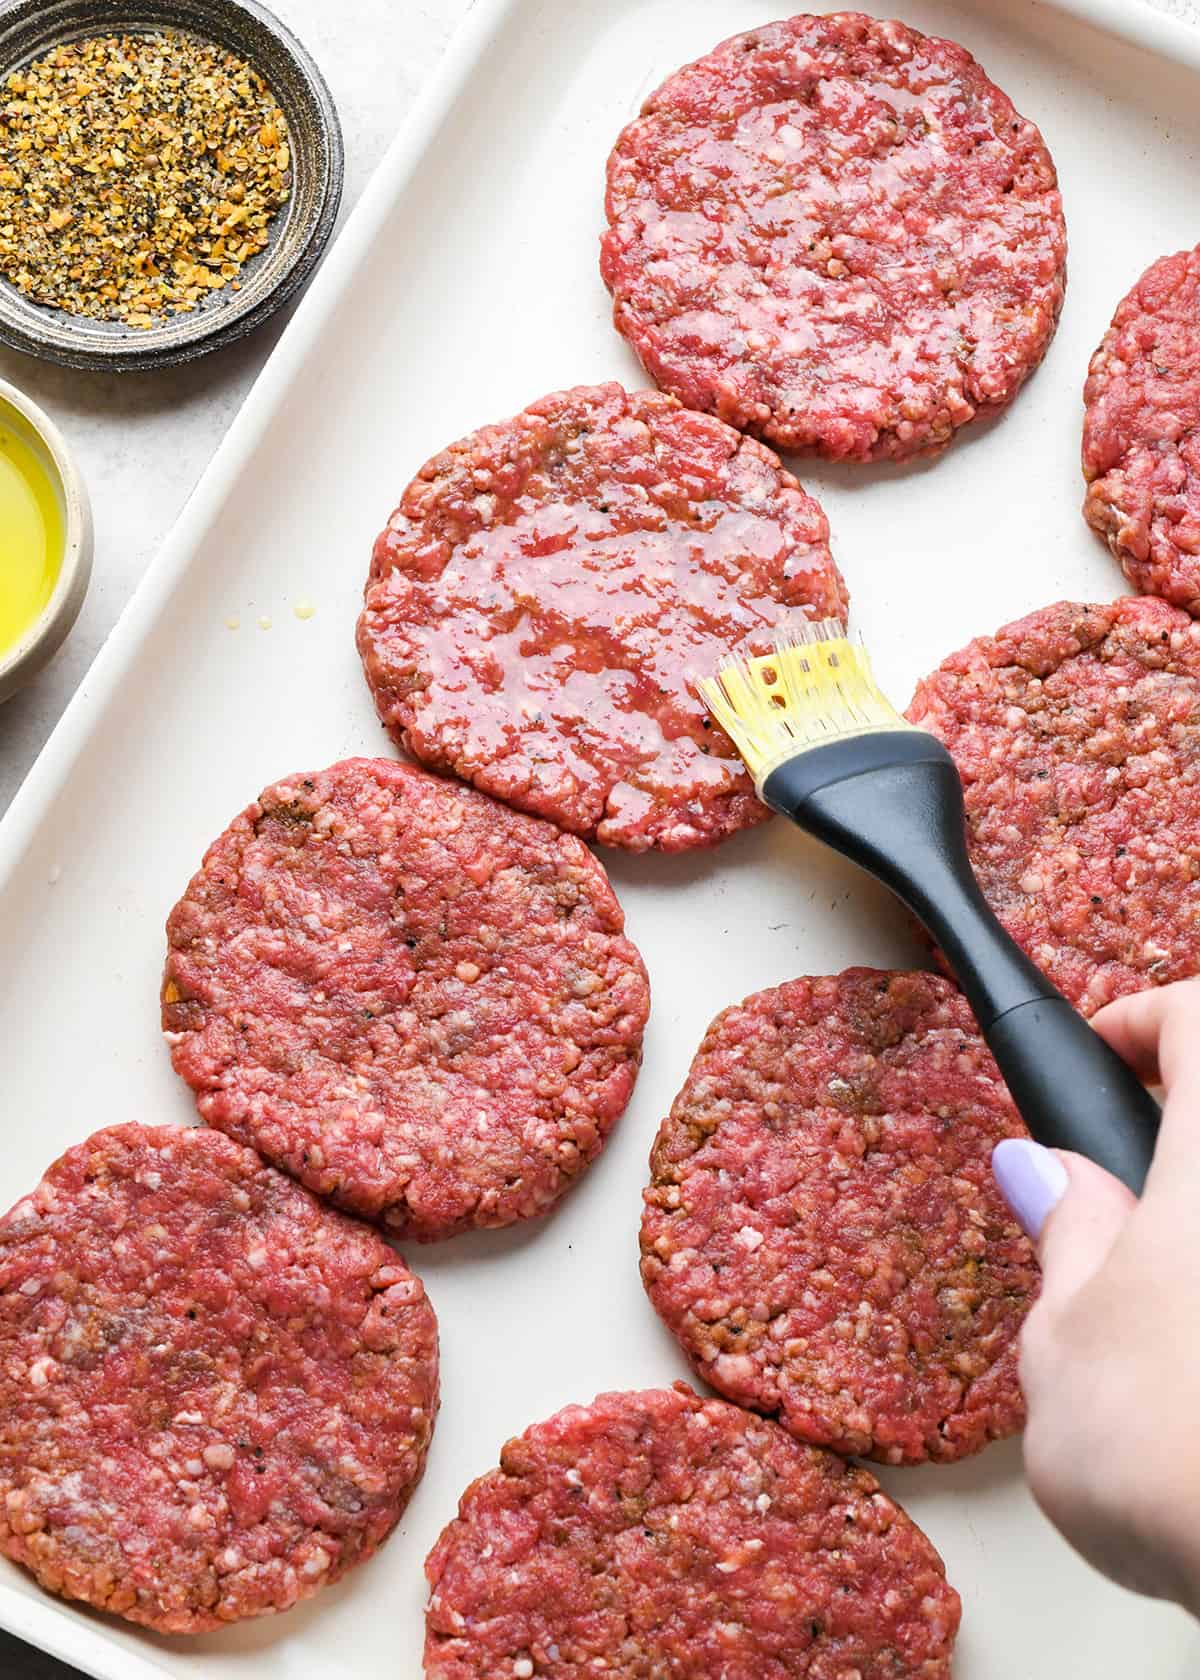 How to Make Hamburger Patties - brushing olive oil on the top of the burger patties